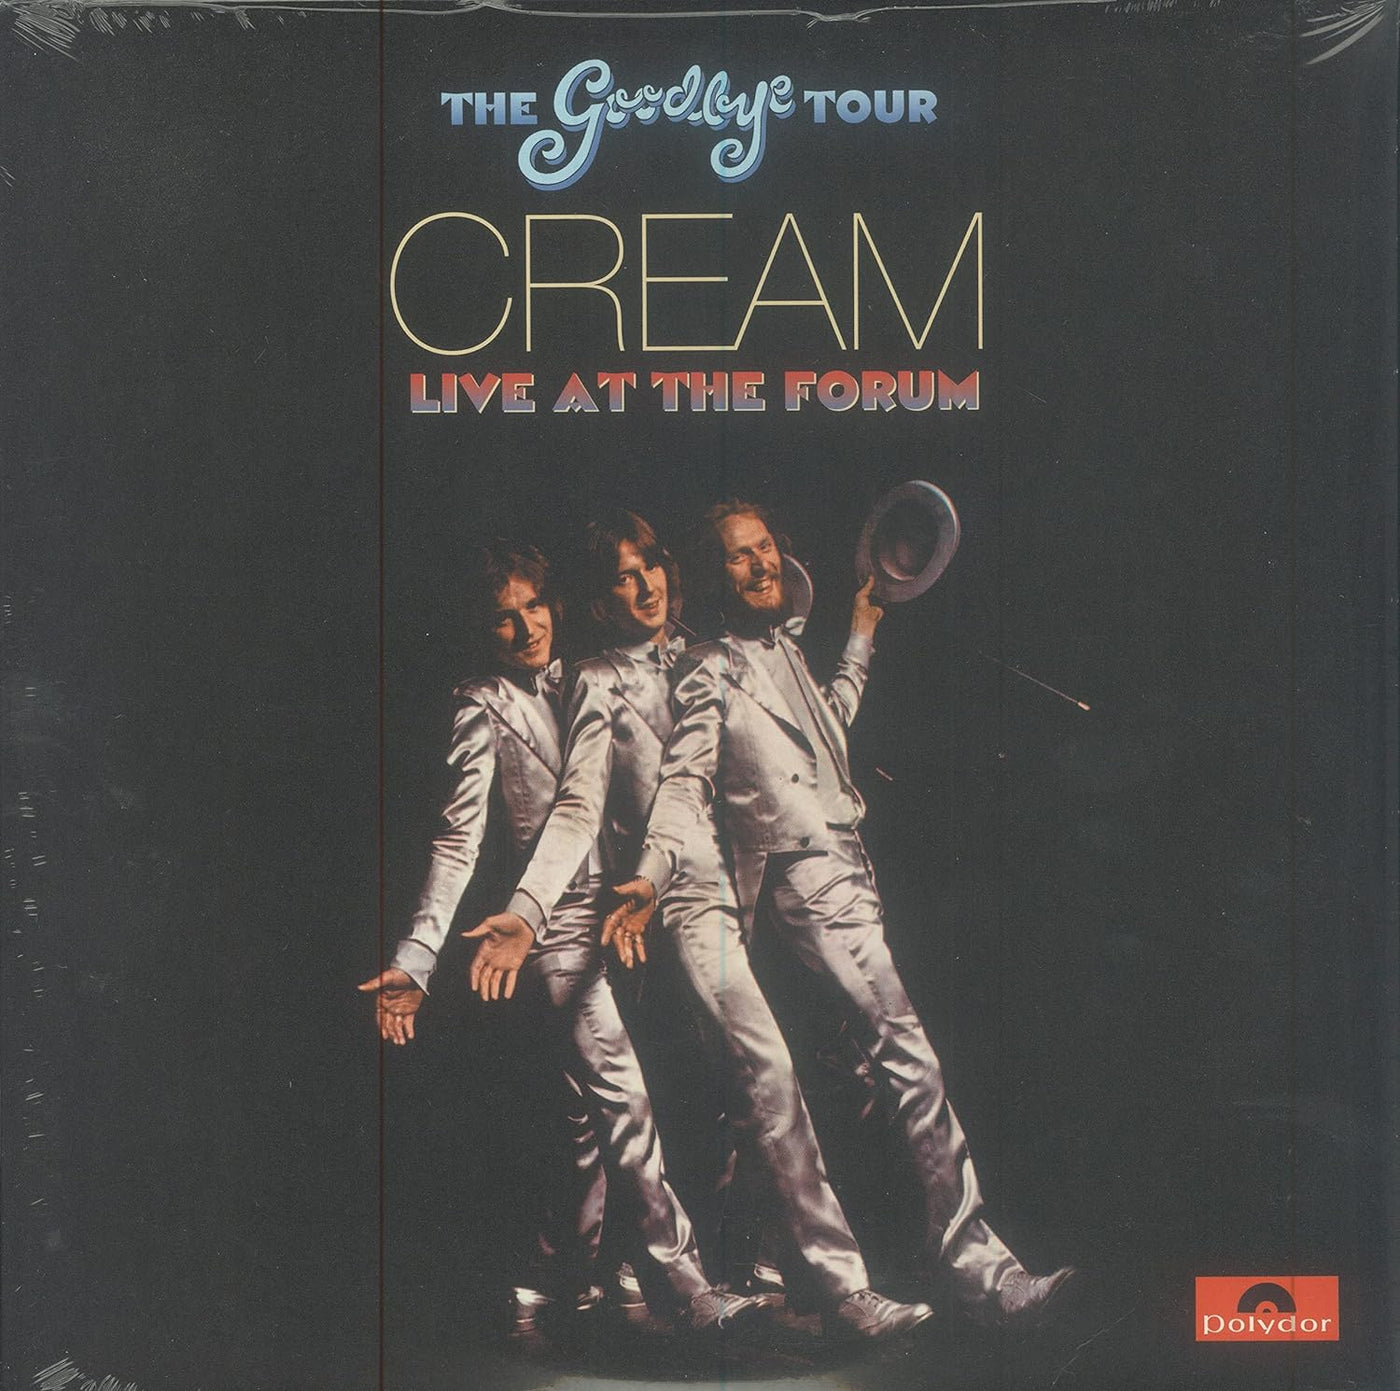 Cream - The Goodbye Tour Live at the Forum (NEW PRESSING exclusive limited edition transparent blue vinyl) 2 LP)